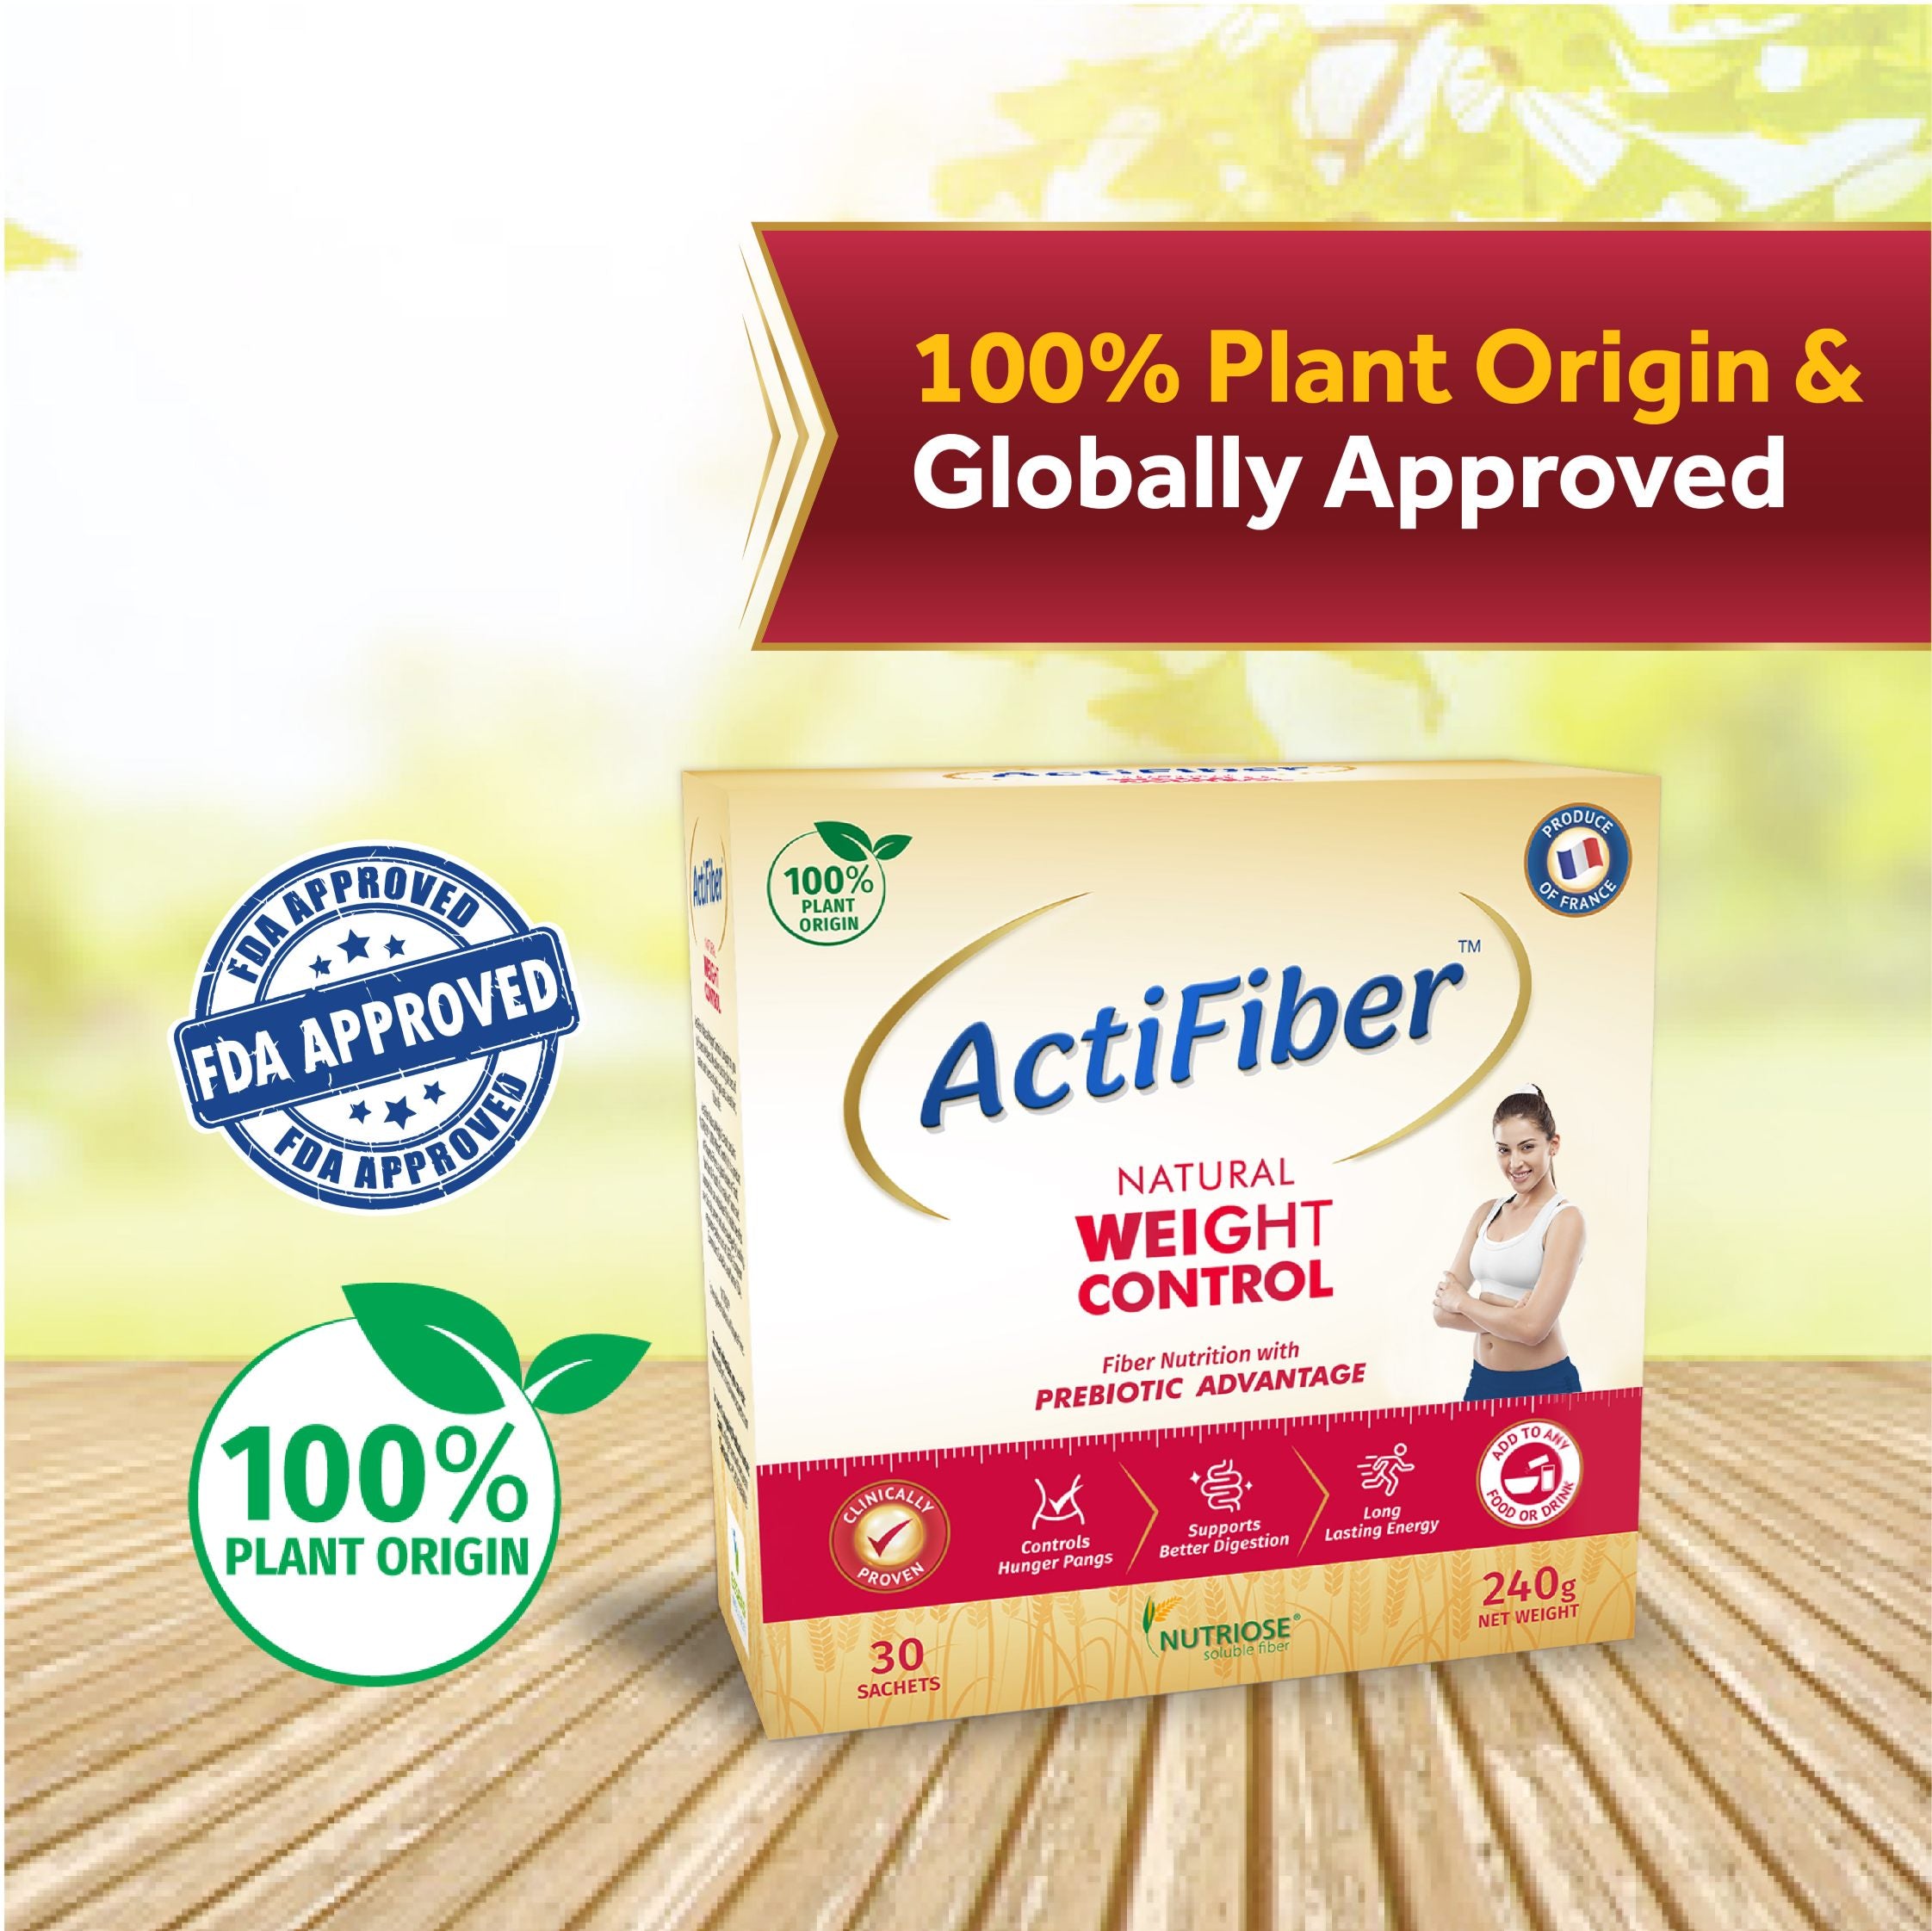 ActiFiber Natural Weight Control | Healthy Weight Reduction that lasts | Reduce extra calorie intake | Healthy Weight Management | Prebiotic Advantage | 100% plant origin | Expert Recommended | Clinically Proven Health Benefits